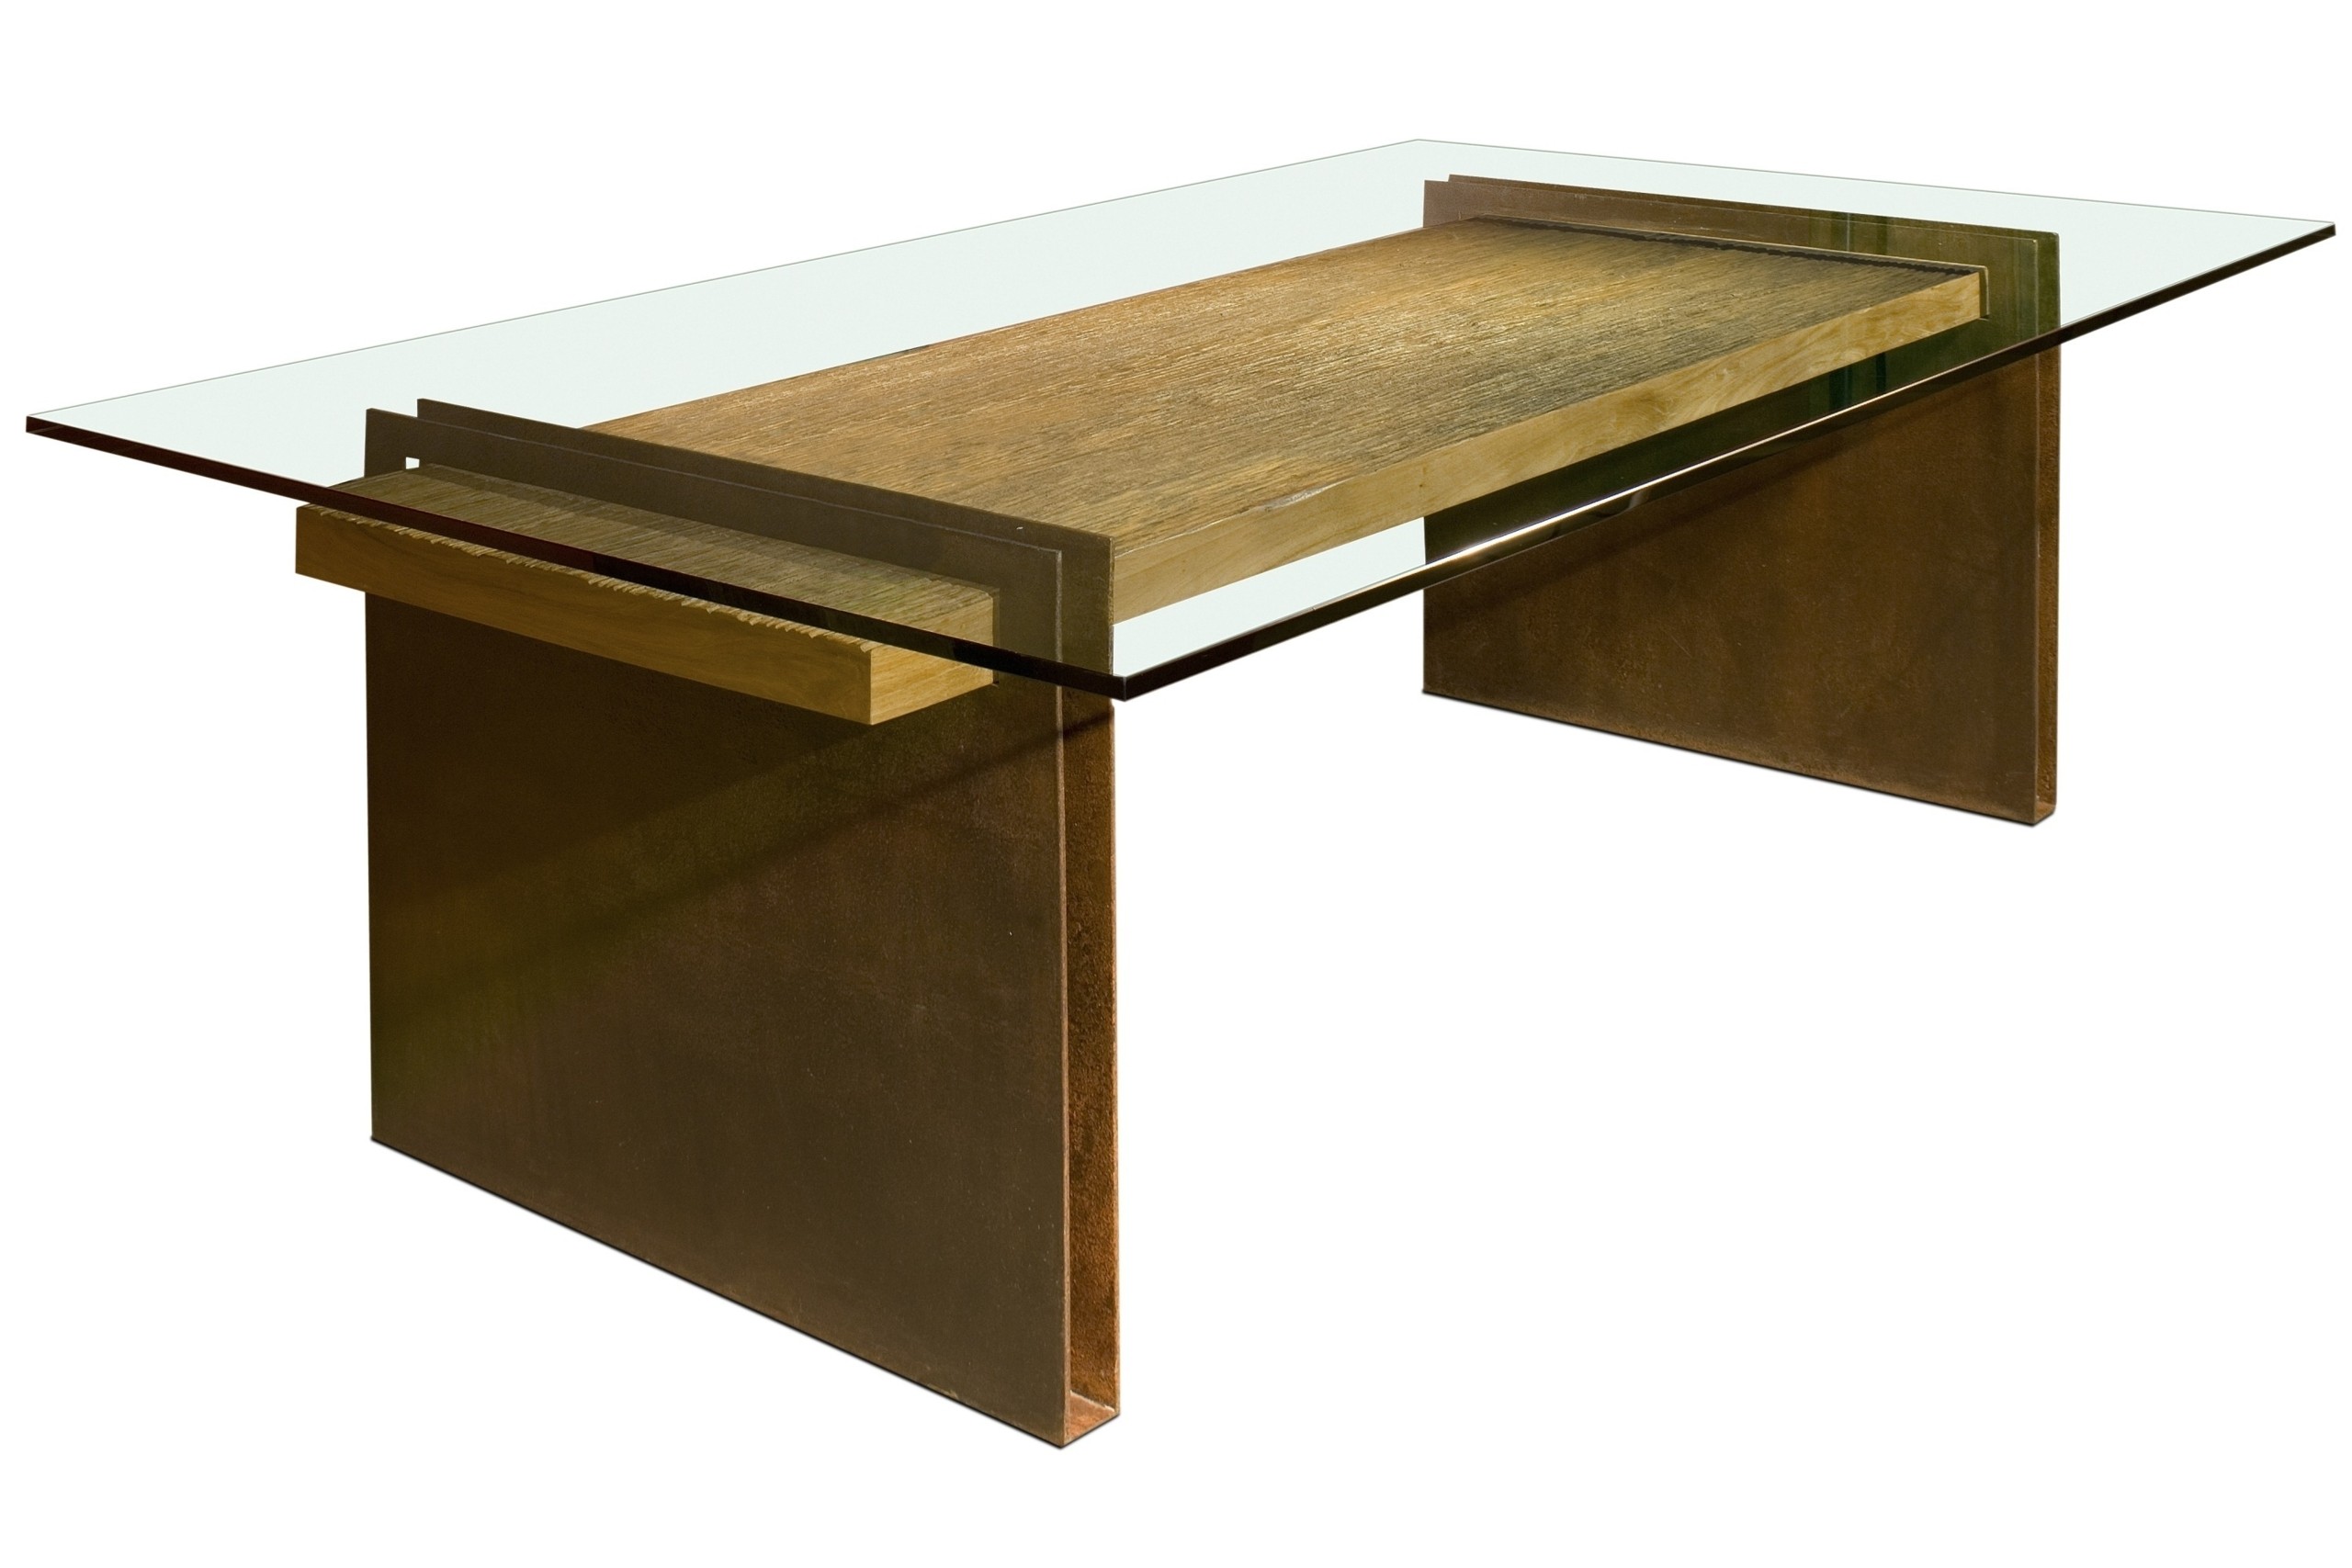 Metal Dining Room Table With Glass Top